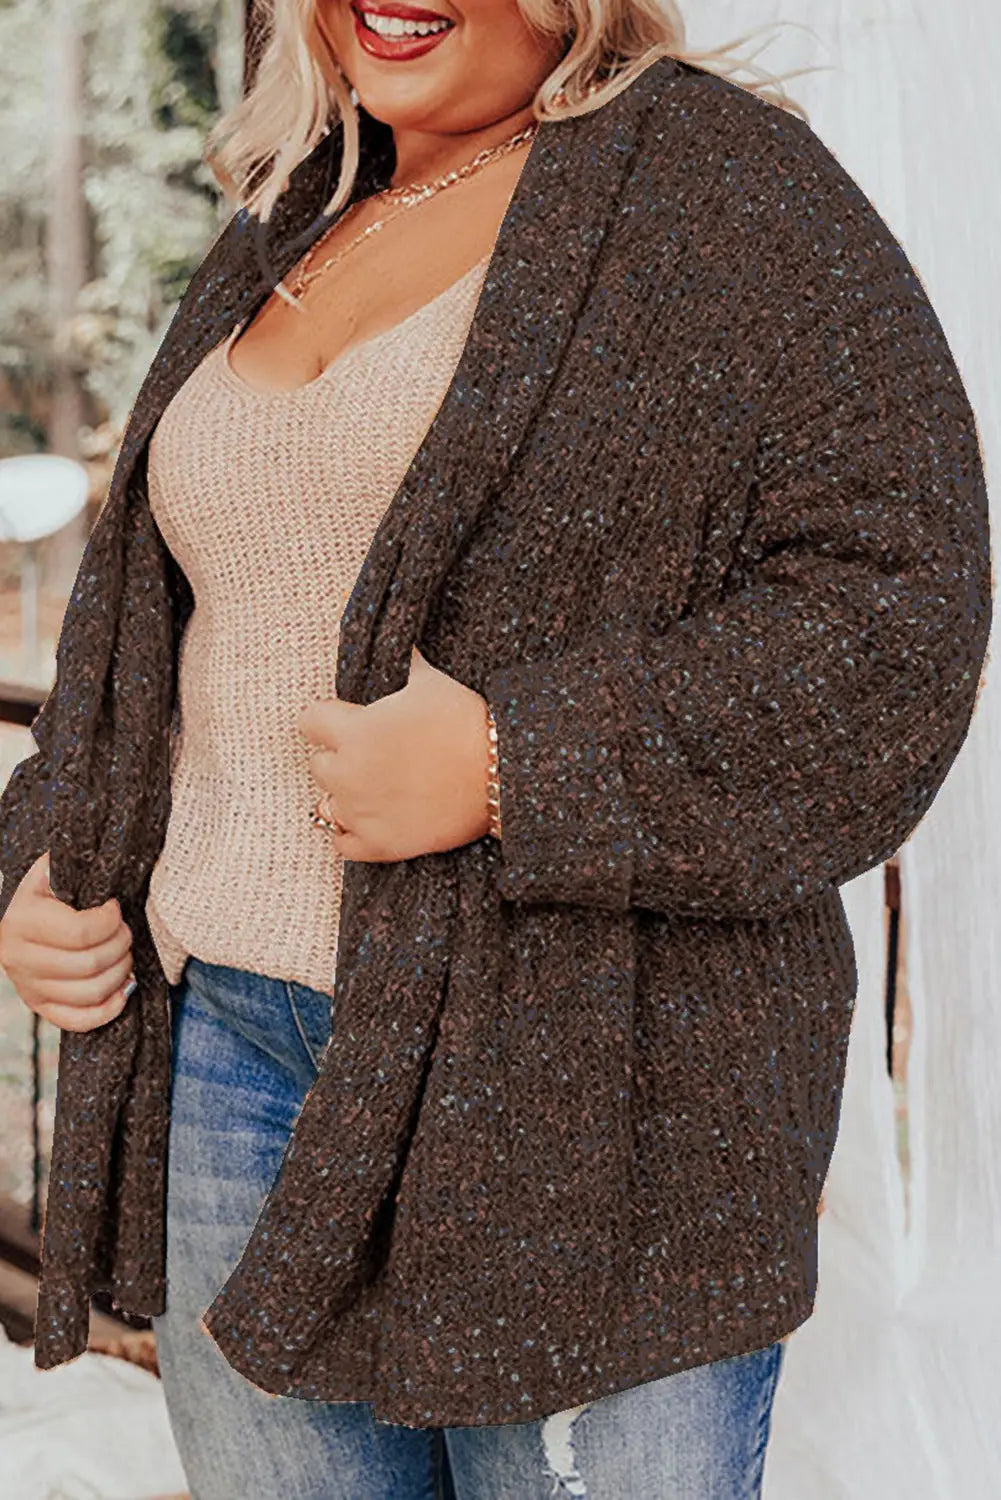 Chicory coffee open front knit plus size cozy cardigan - 1x